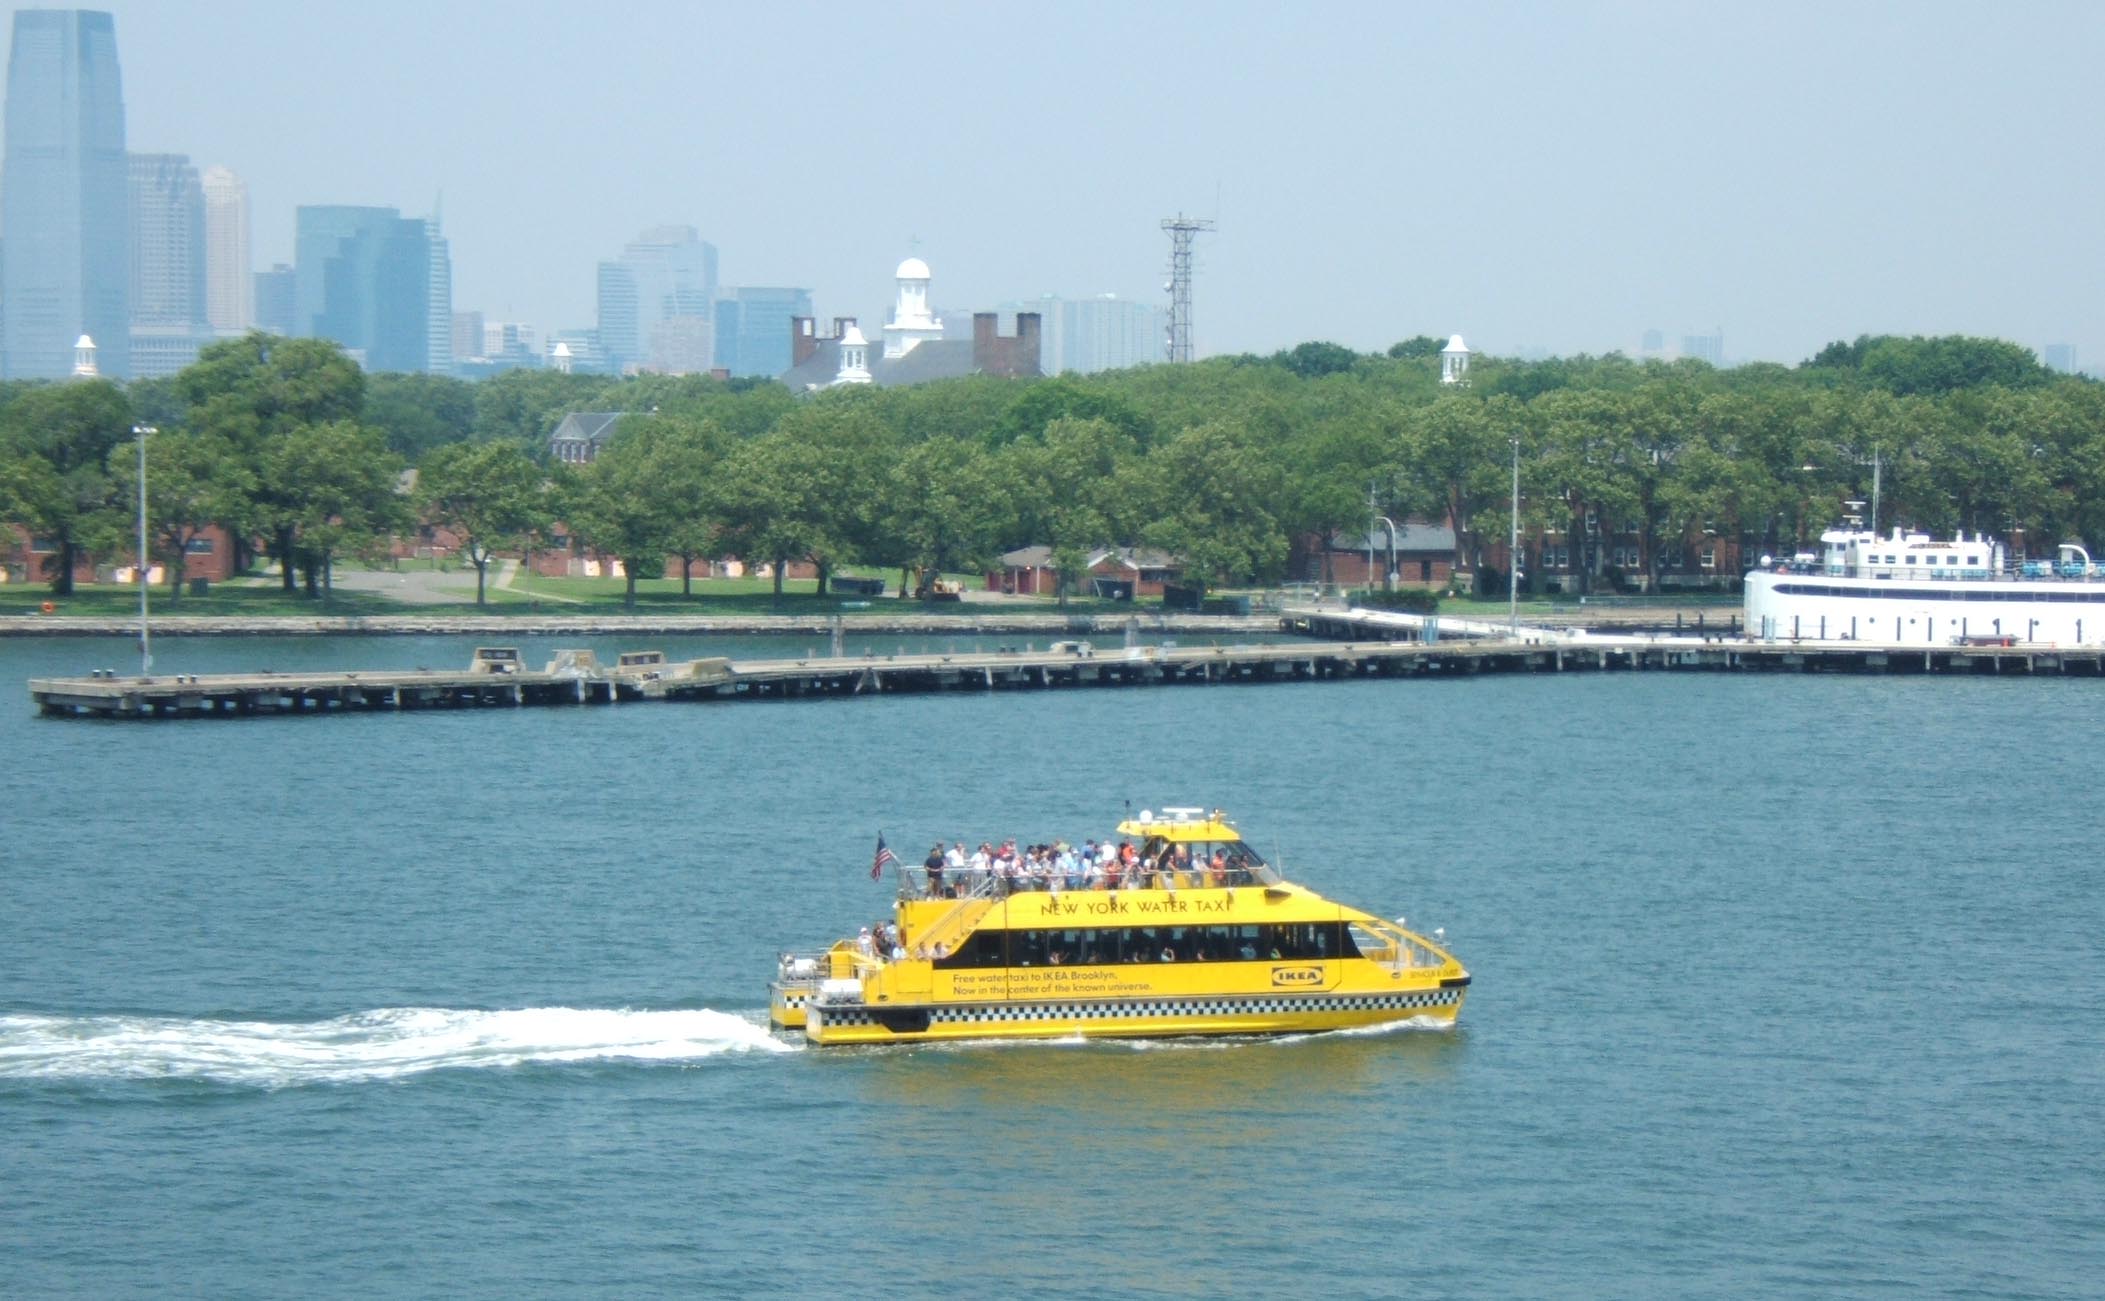 NYC leaving water taxi